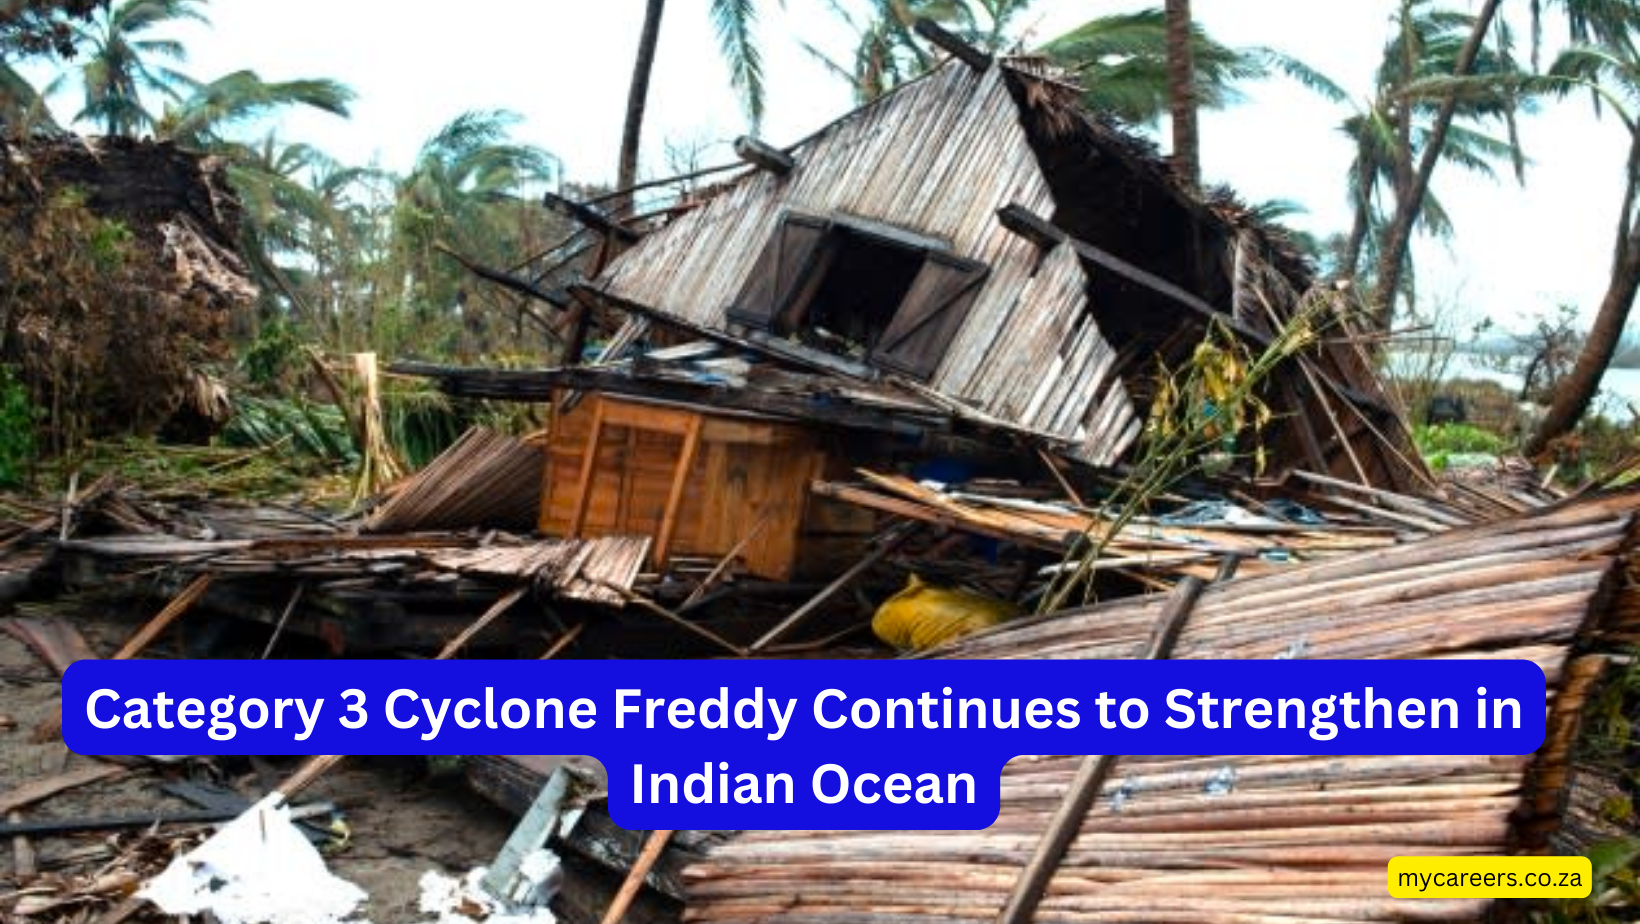 Residents Urged to Take Precautions as Cyclone Freddy Threatens Southern Africa